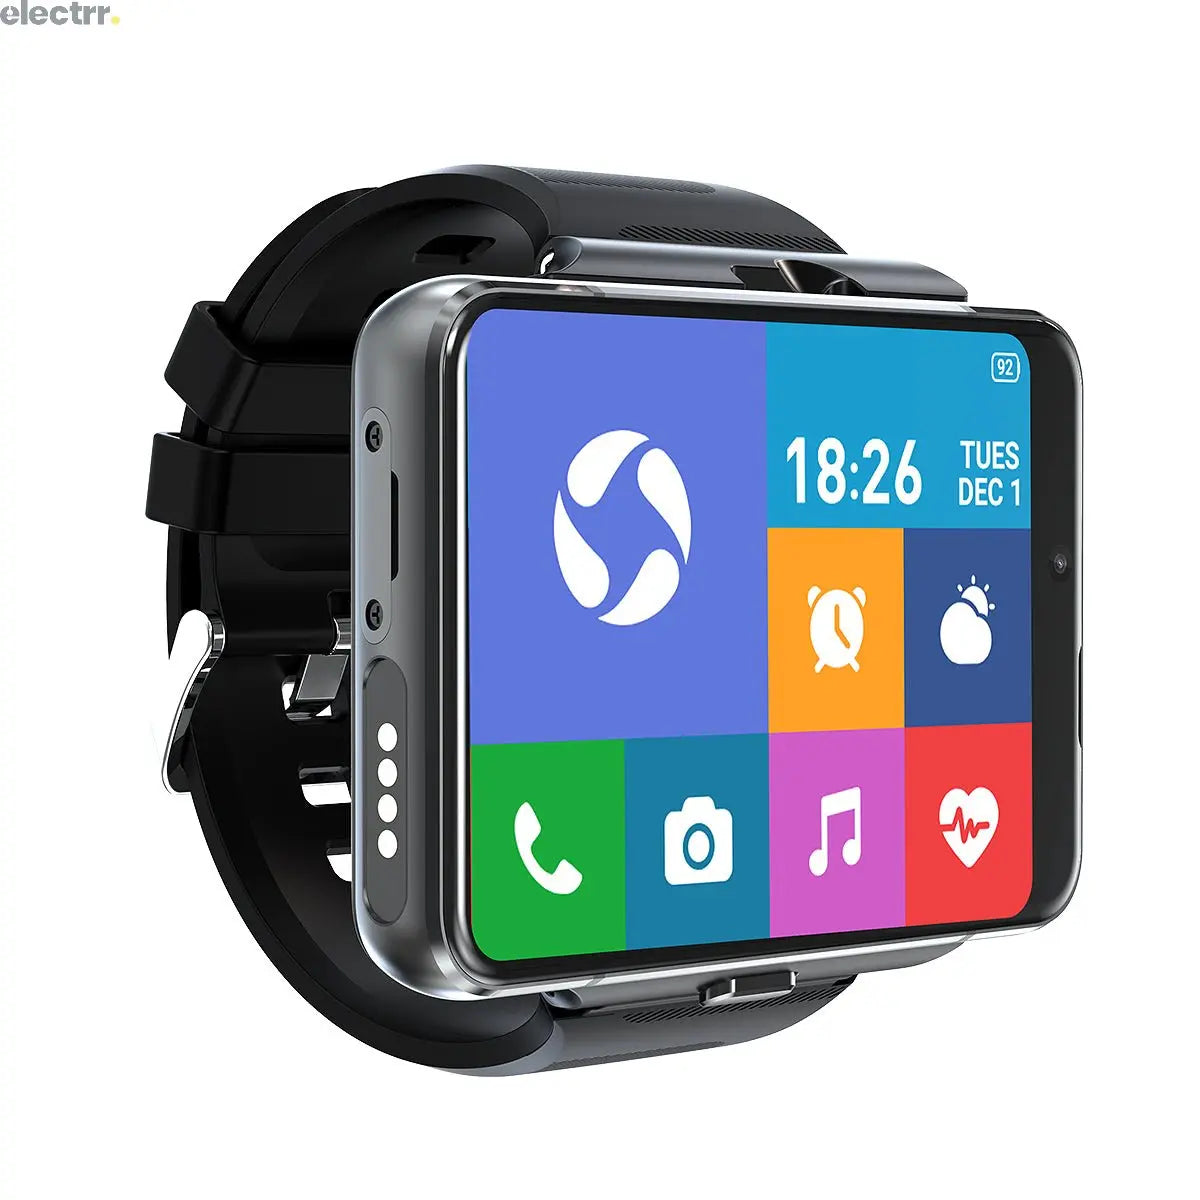 Smartwatches Electrr Inc